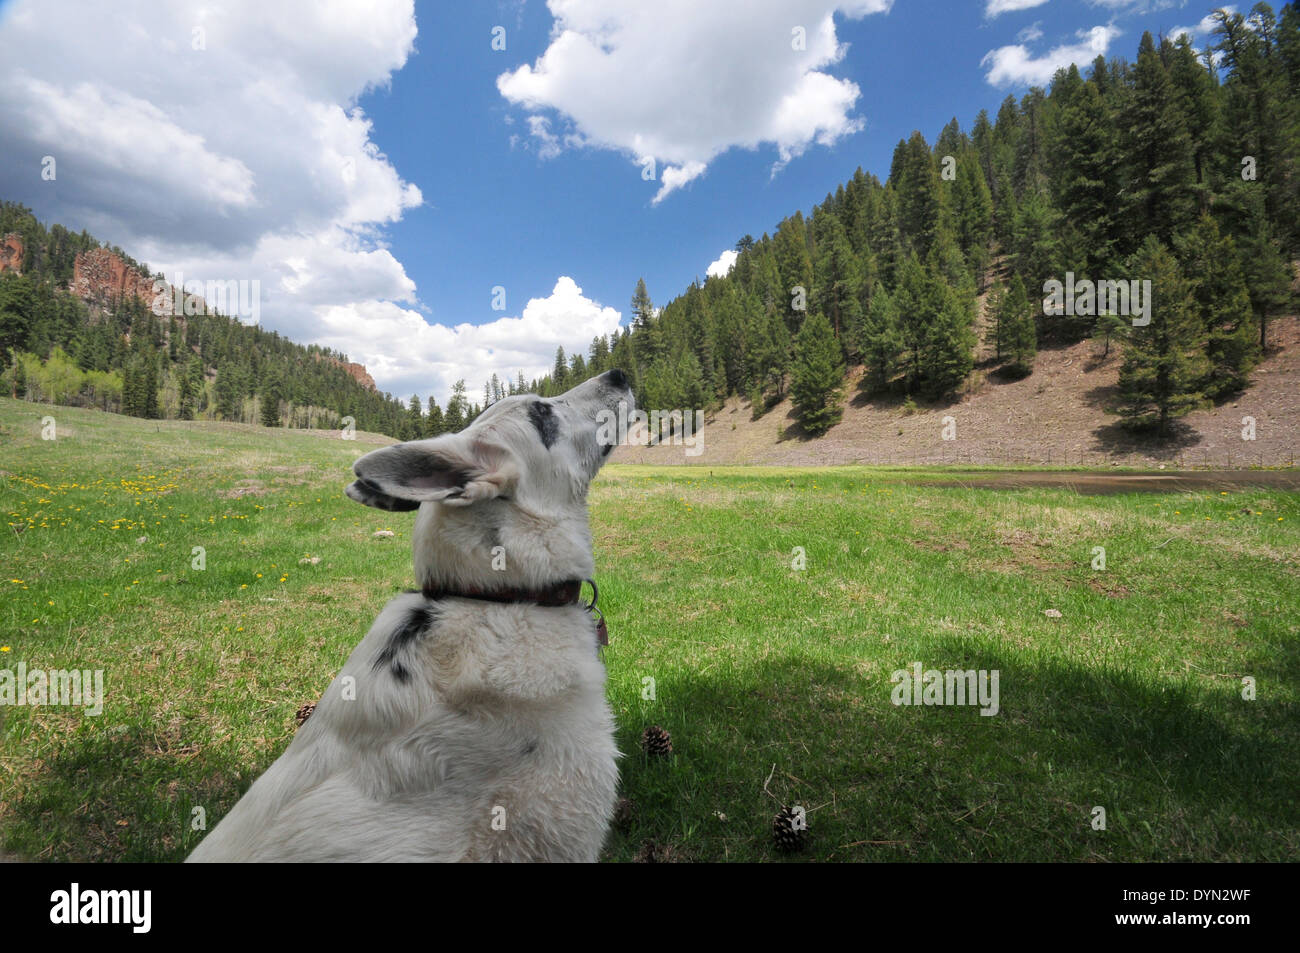 My dog, Banjo, on hike in Jemez Mountains of New Mexico - USA Stock Photo